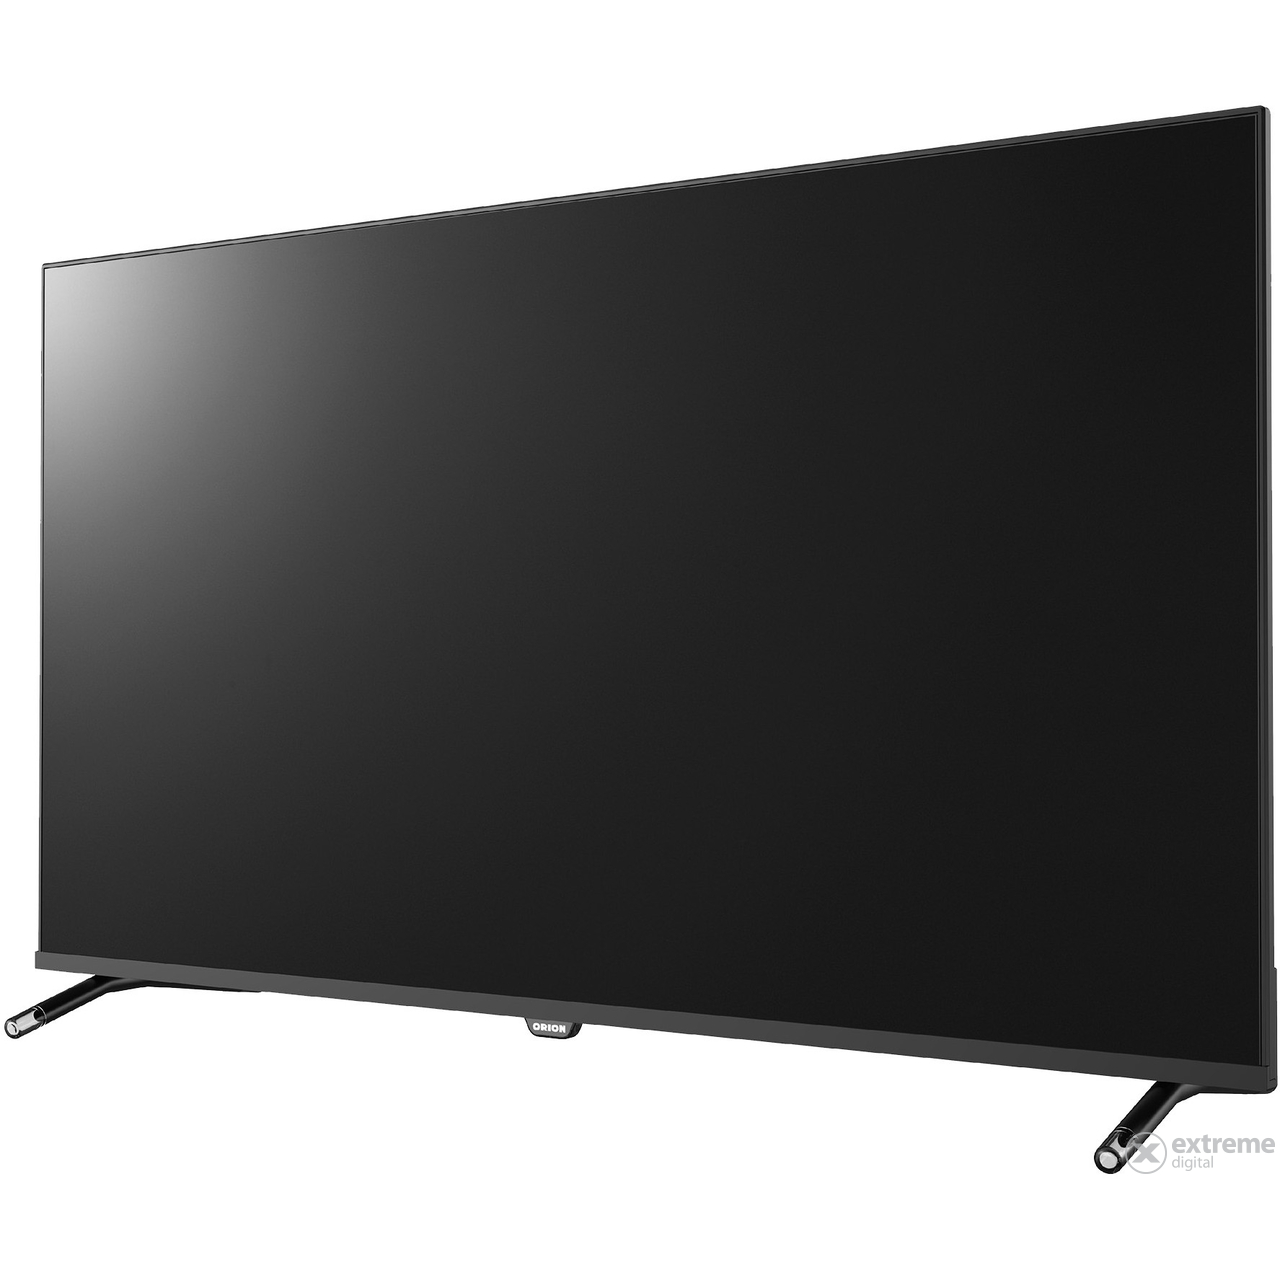 LED TV Orion OR3220FHD 32" FullHD